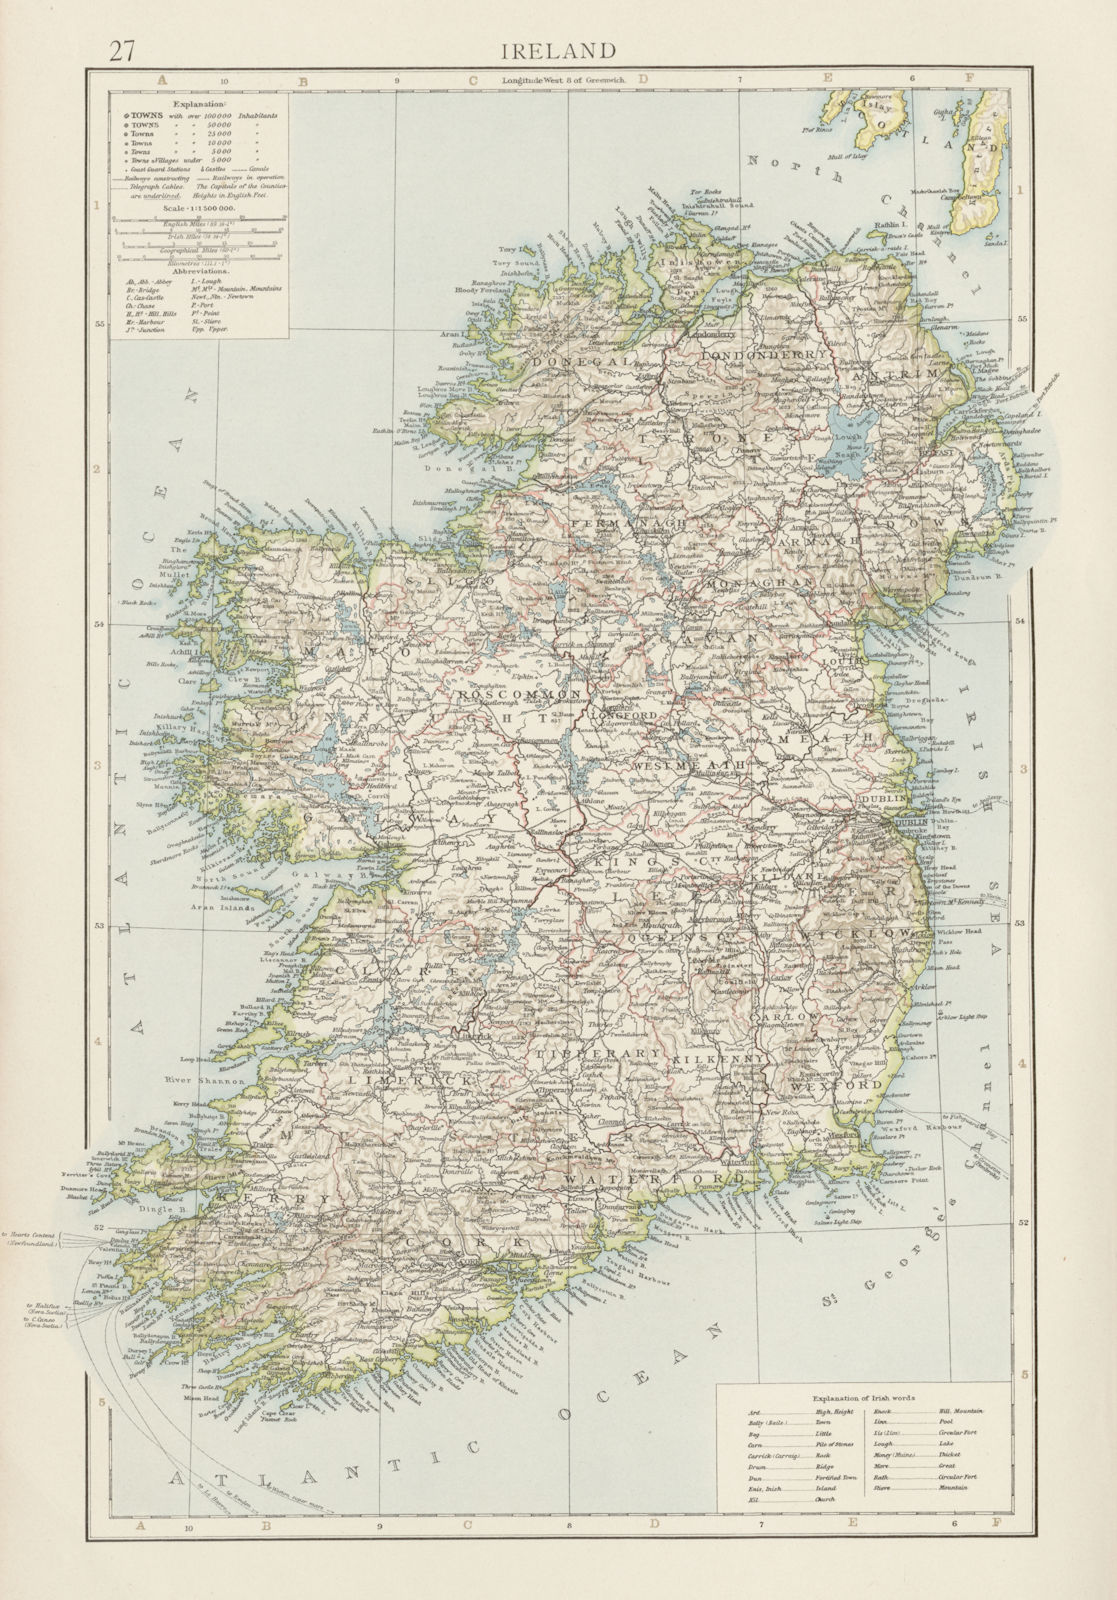 Associate Product Ireland. THE TIMES 1900 old antique vintage map plan chart